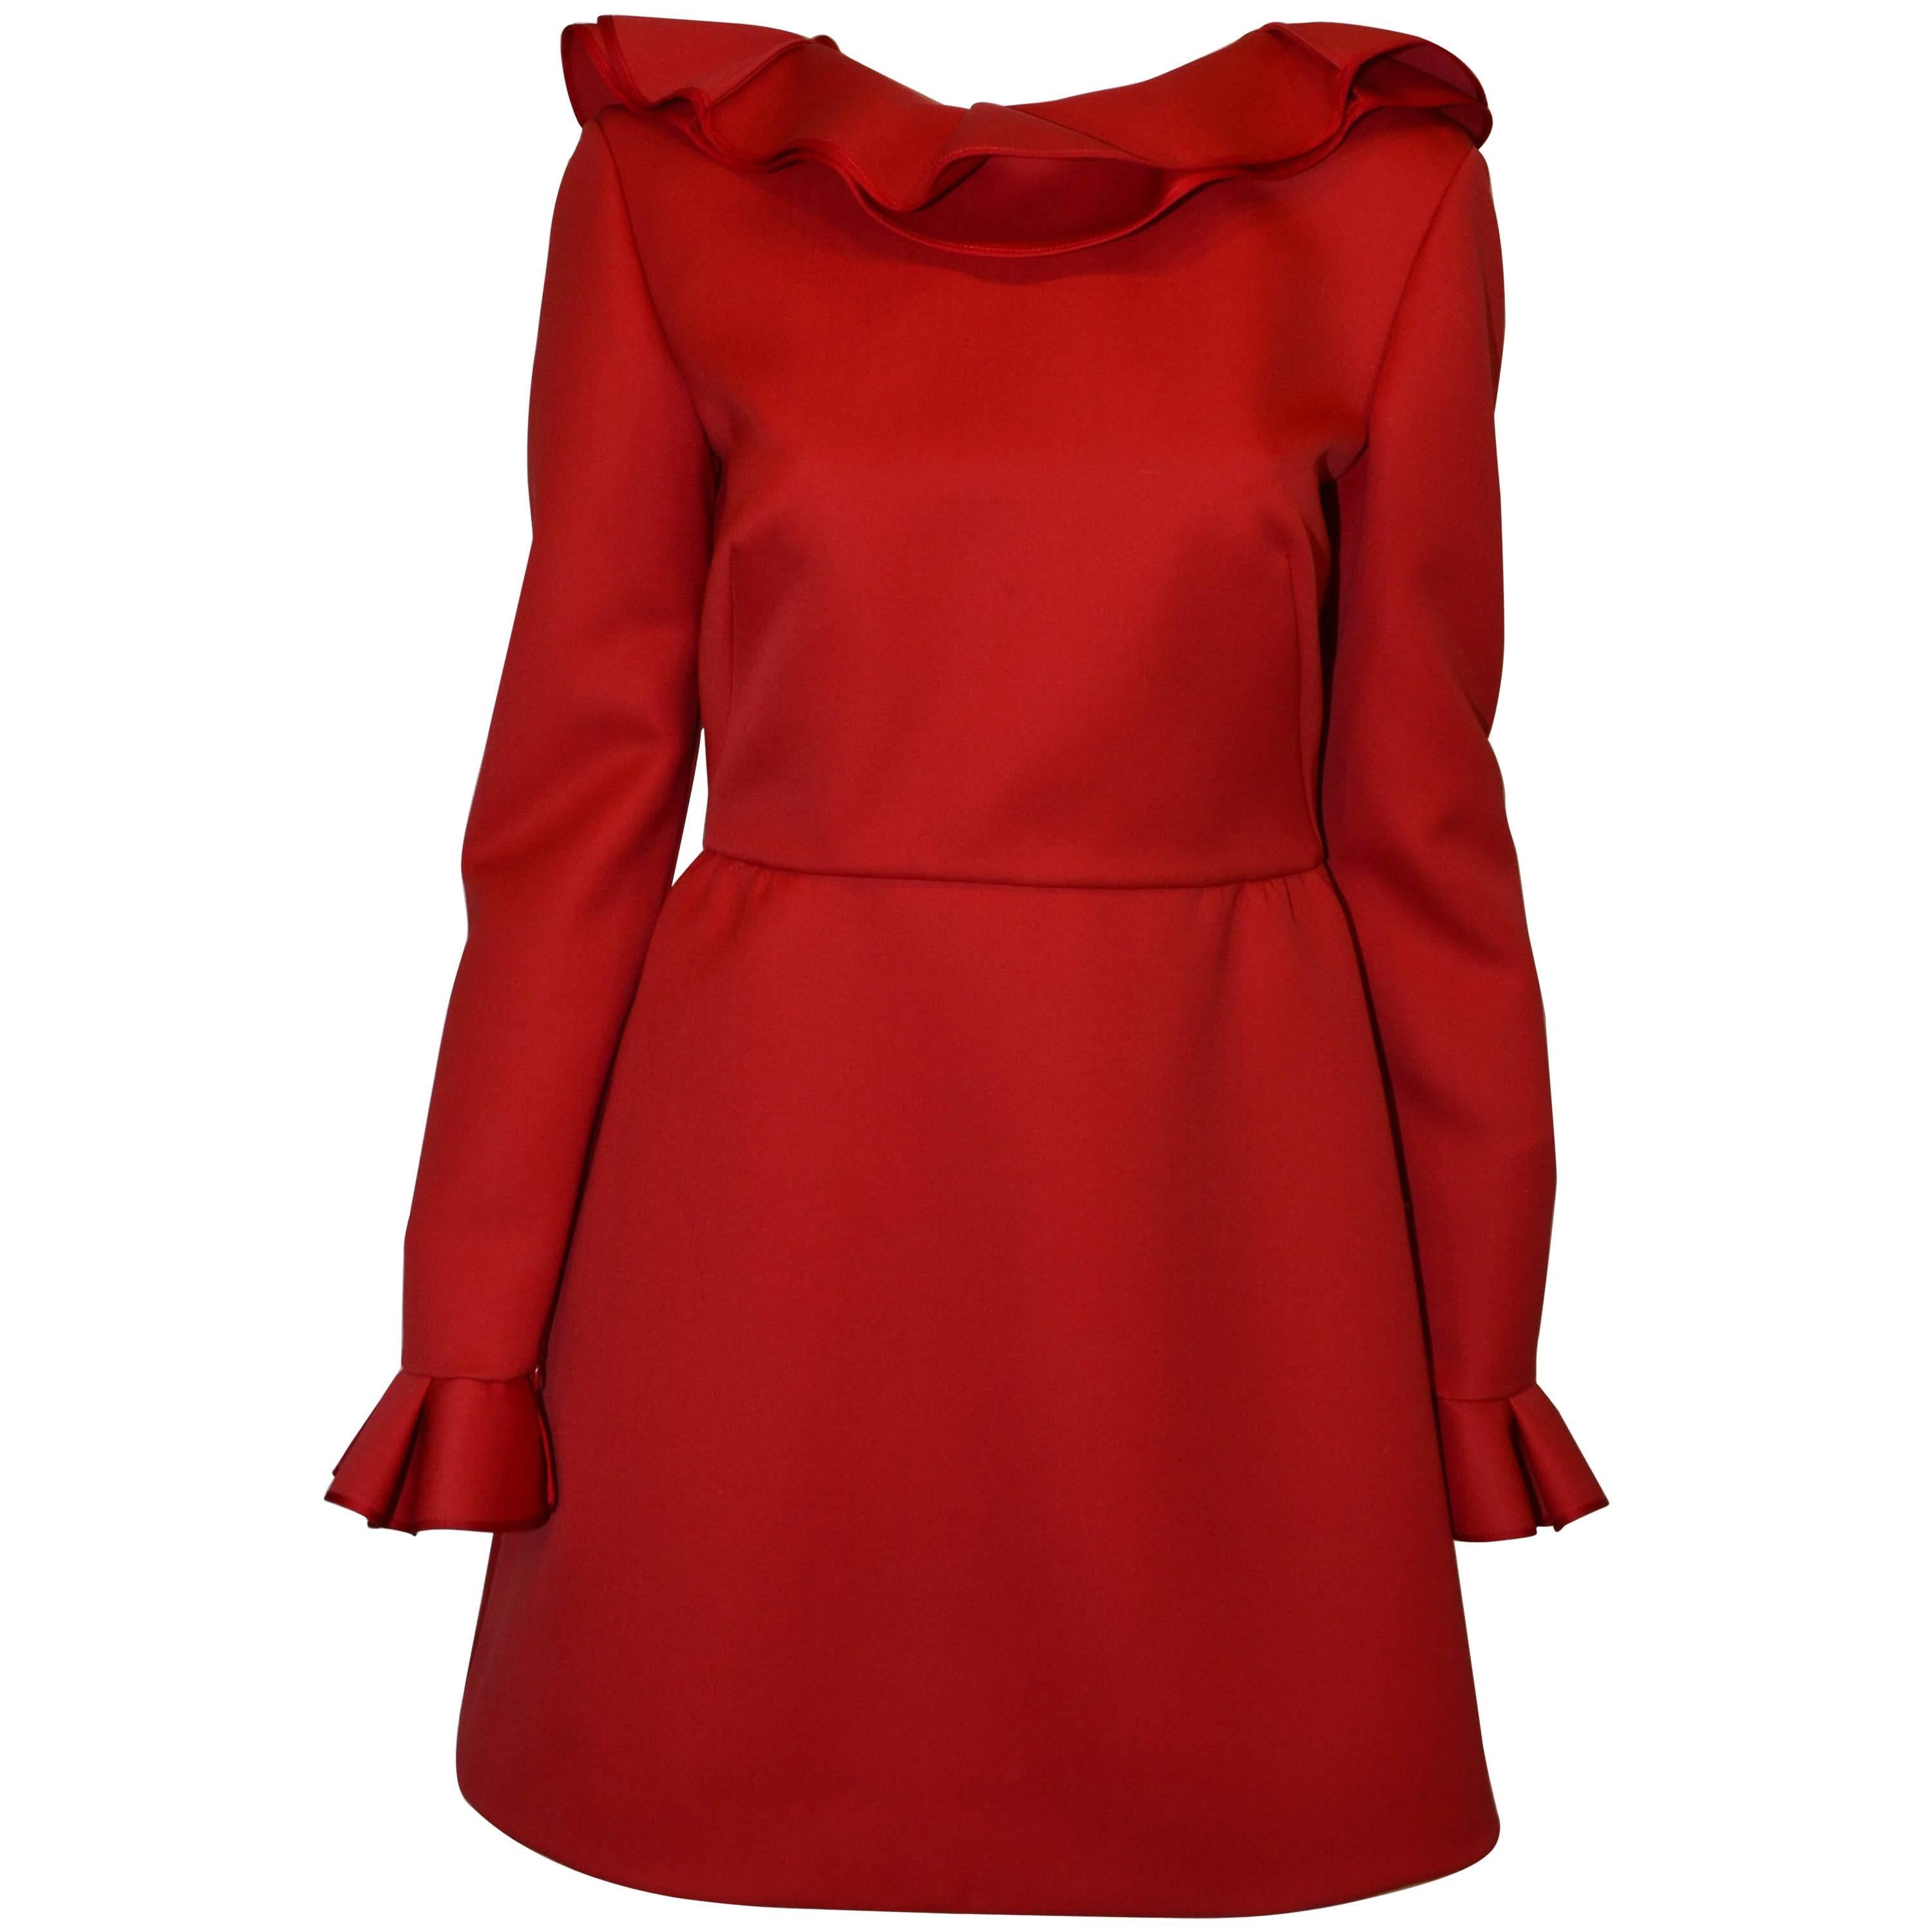 Valentino Wool Dress in Red with Ruffle